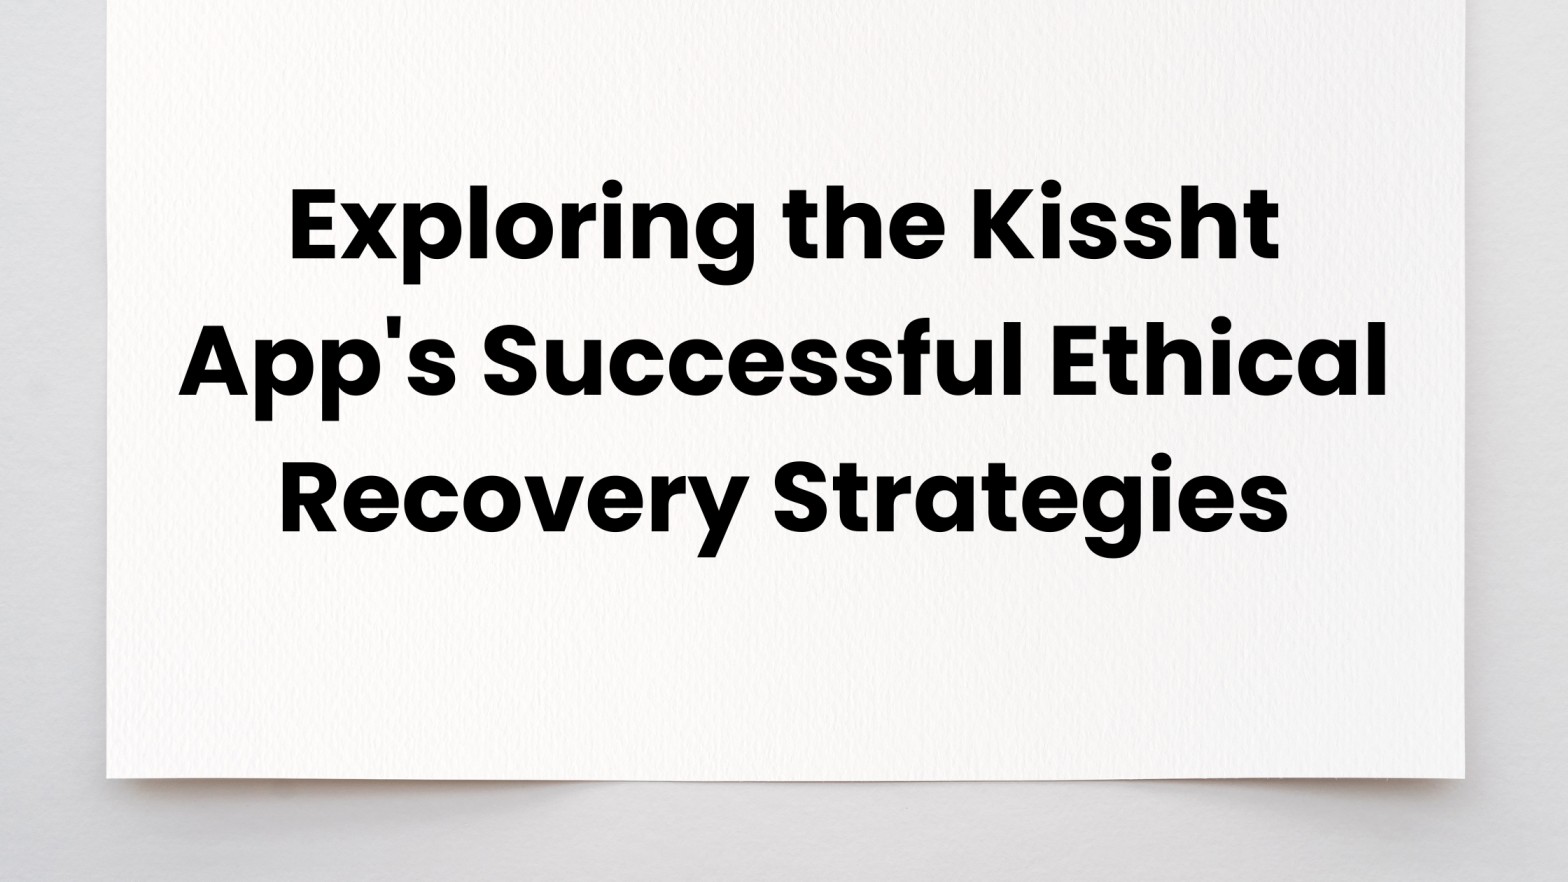 Exploring the Kissht App's Successful Ethical Recovery Strategies